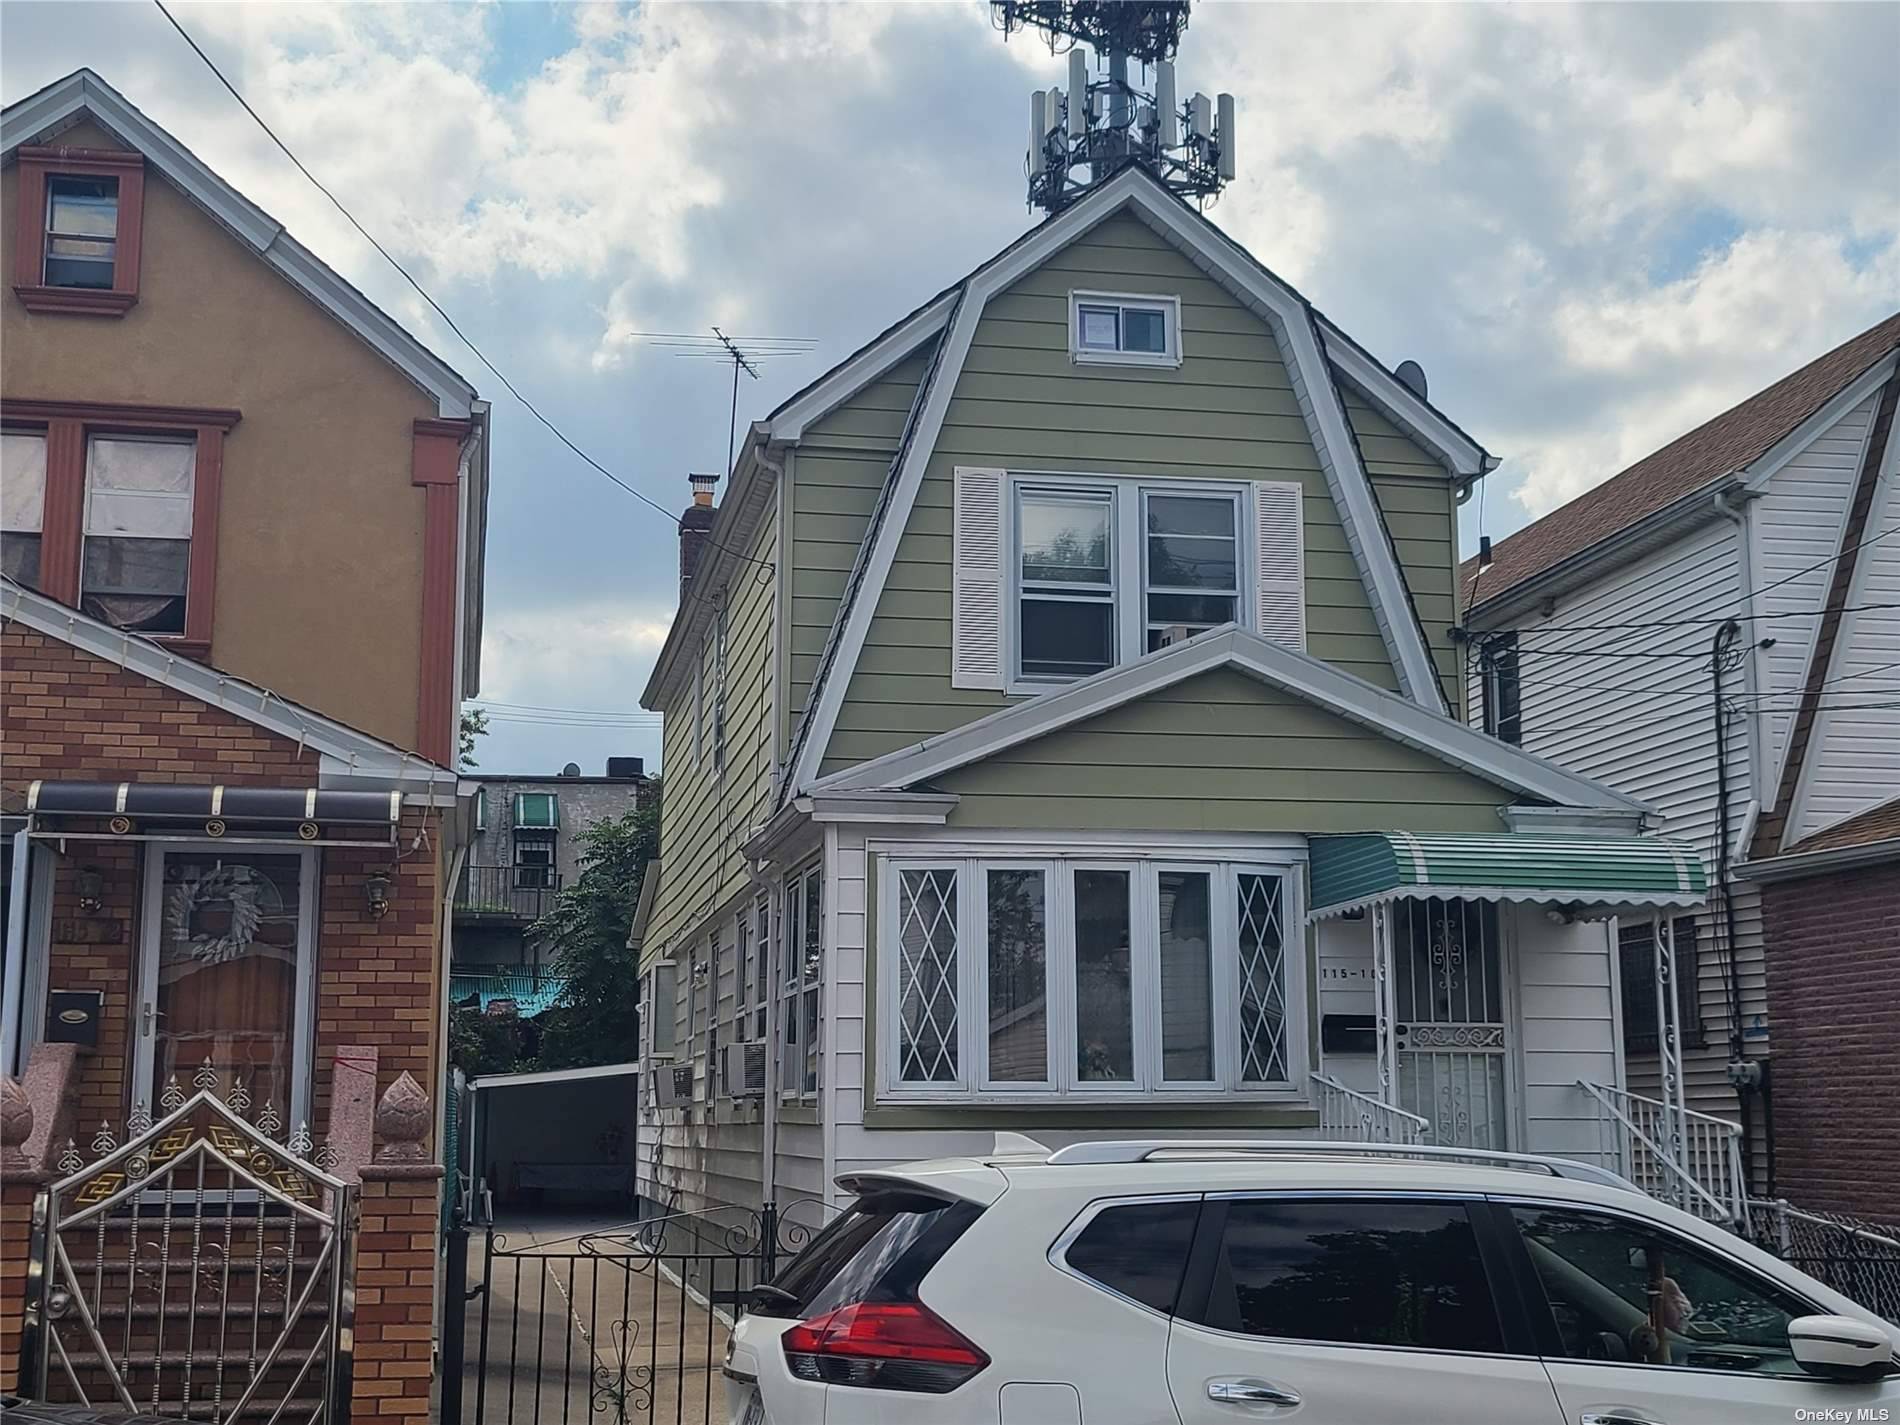 Legal Two Family For Sale, Located In The Charming Neighborhood Of South Ozone Park.